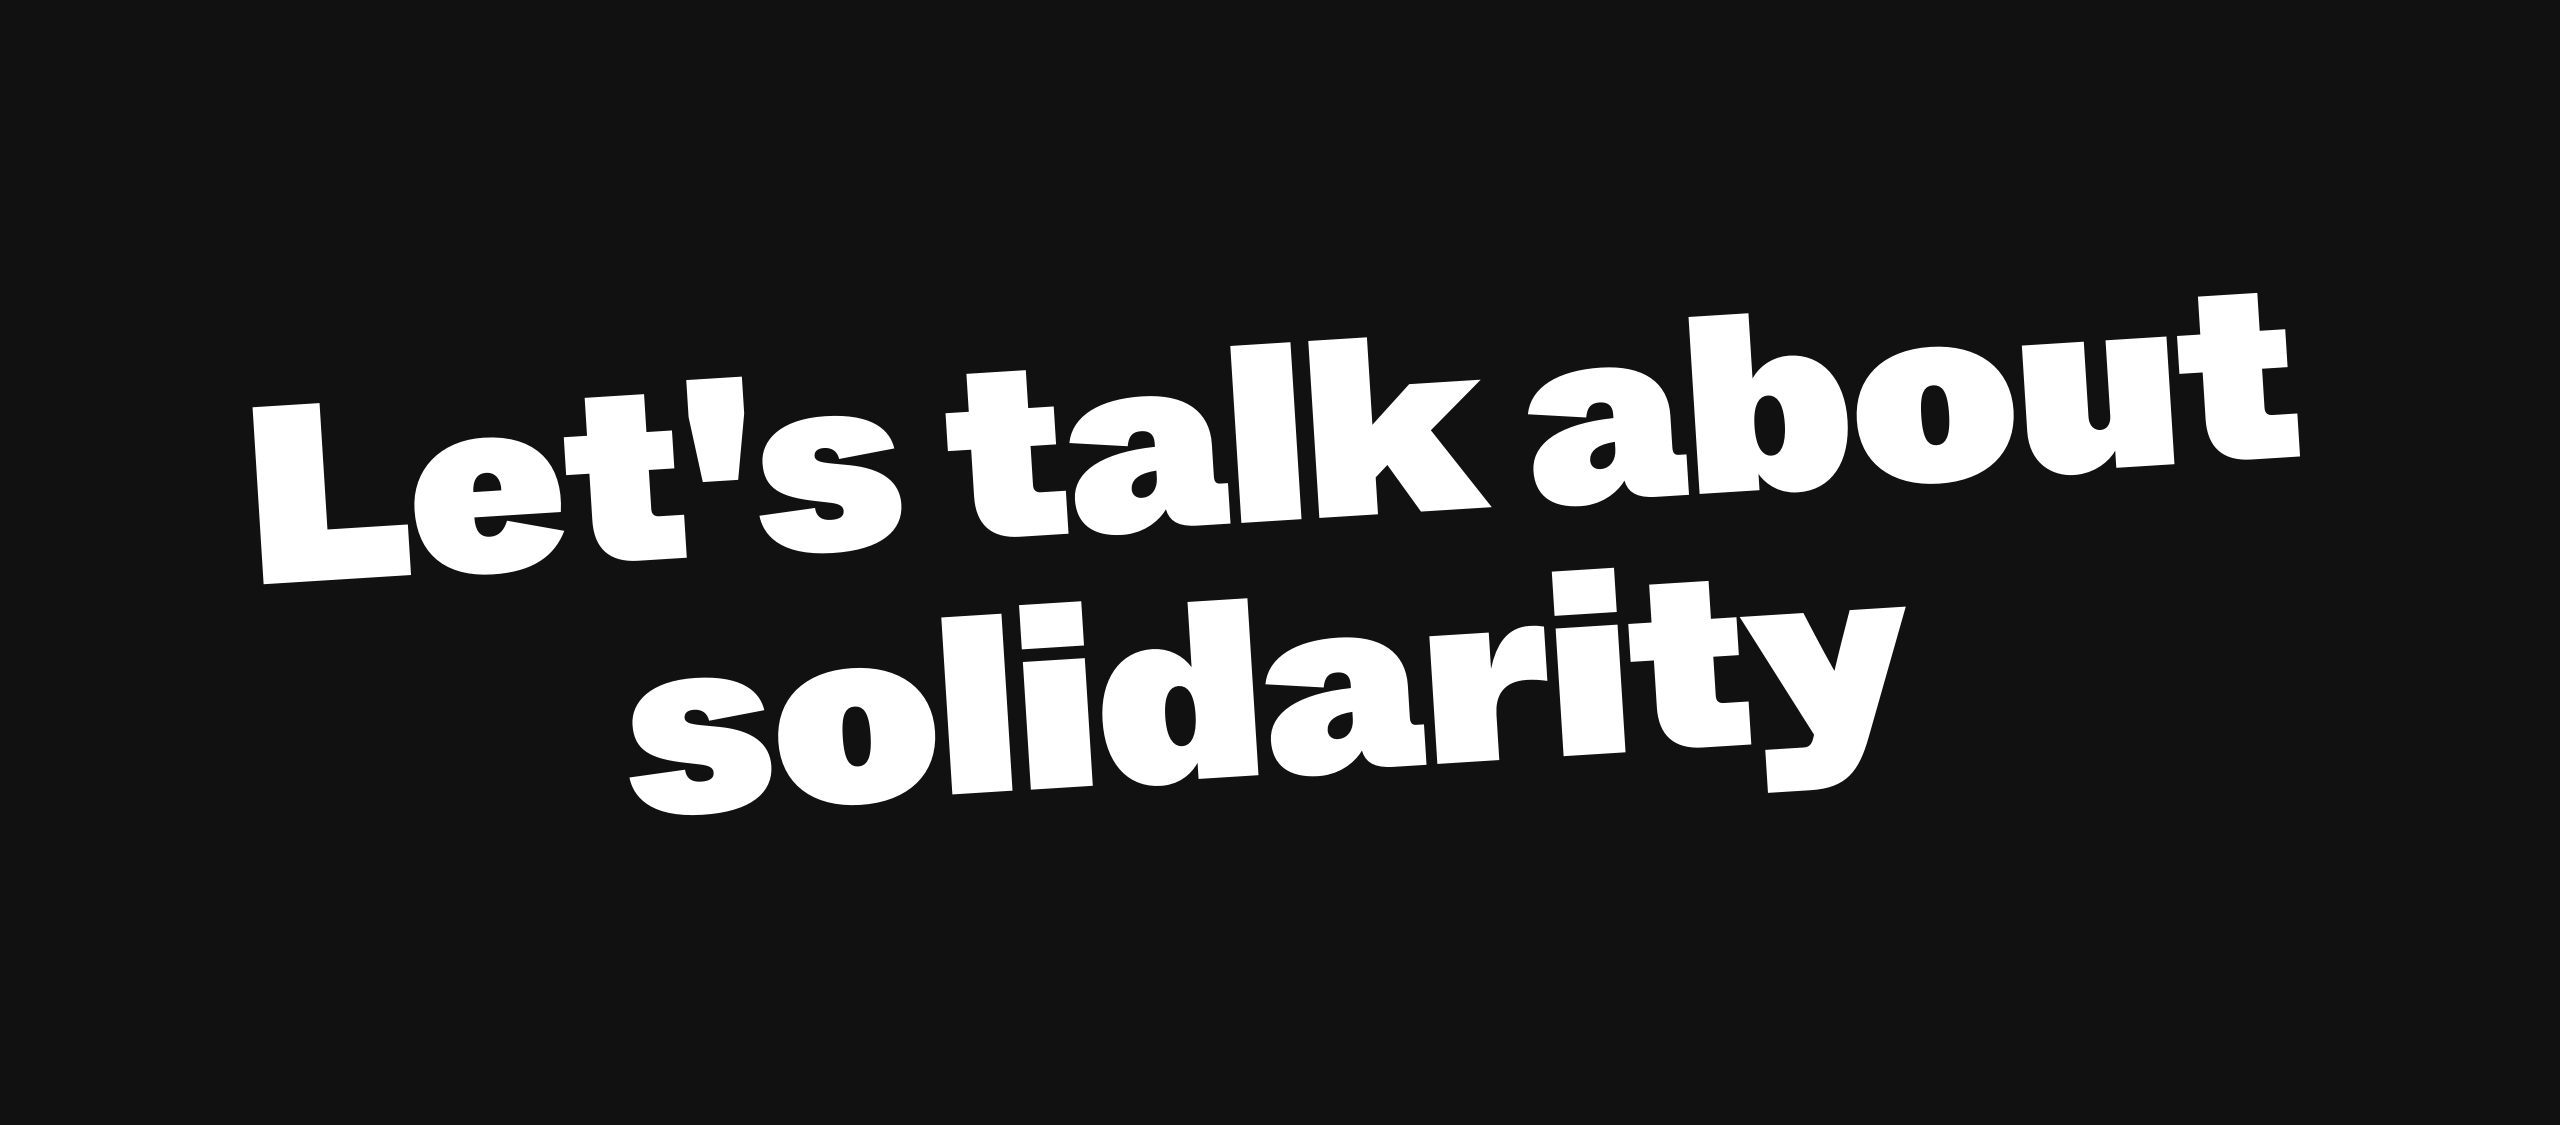 Let’s talk about solidarity